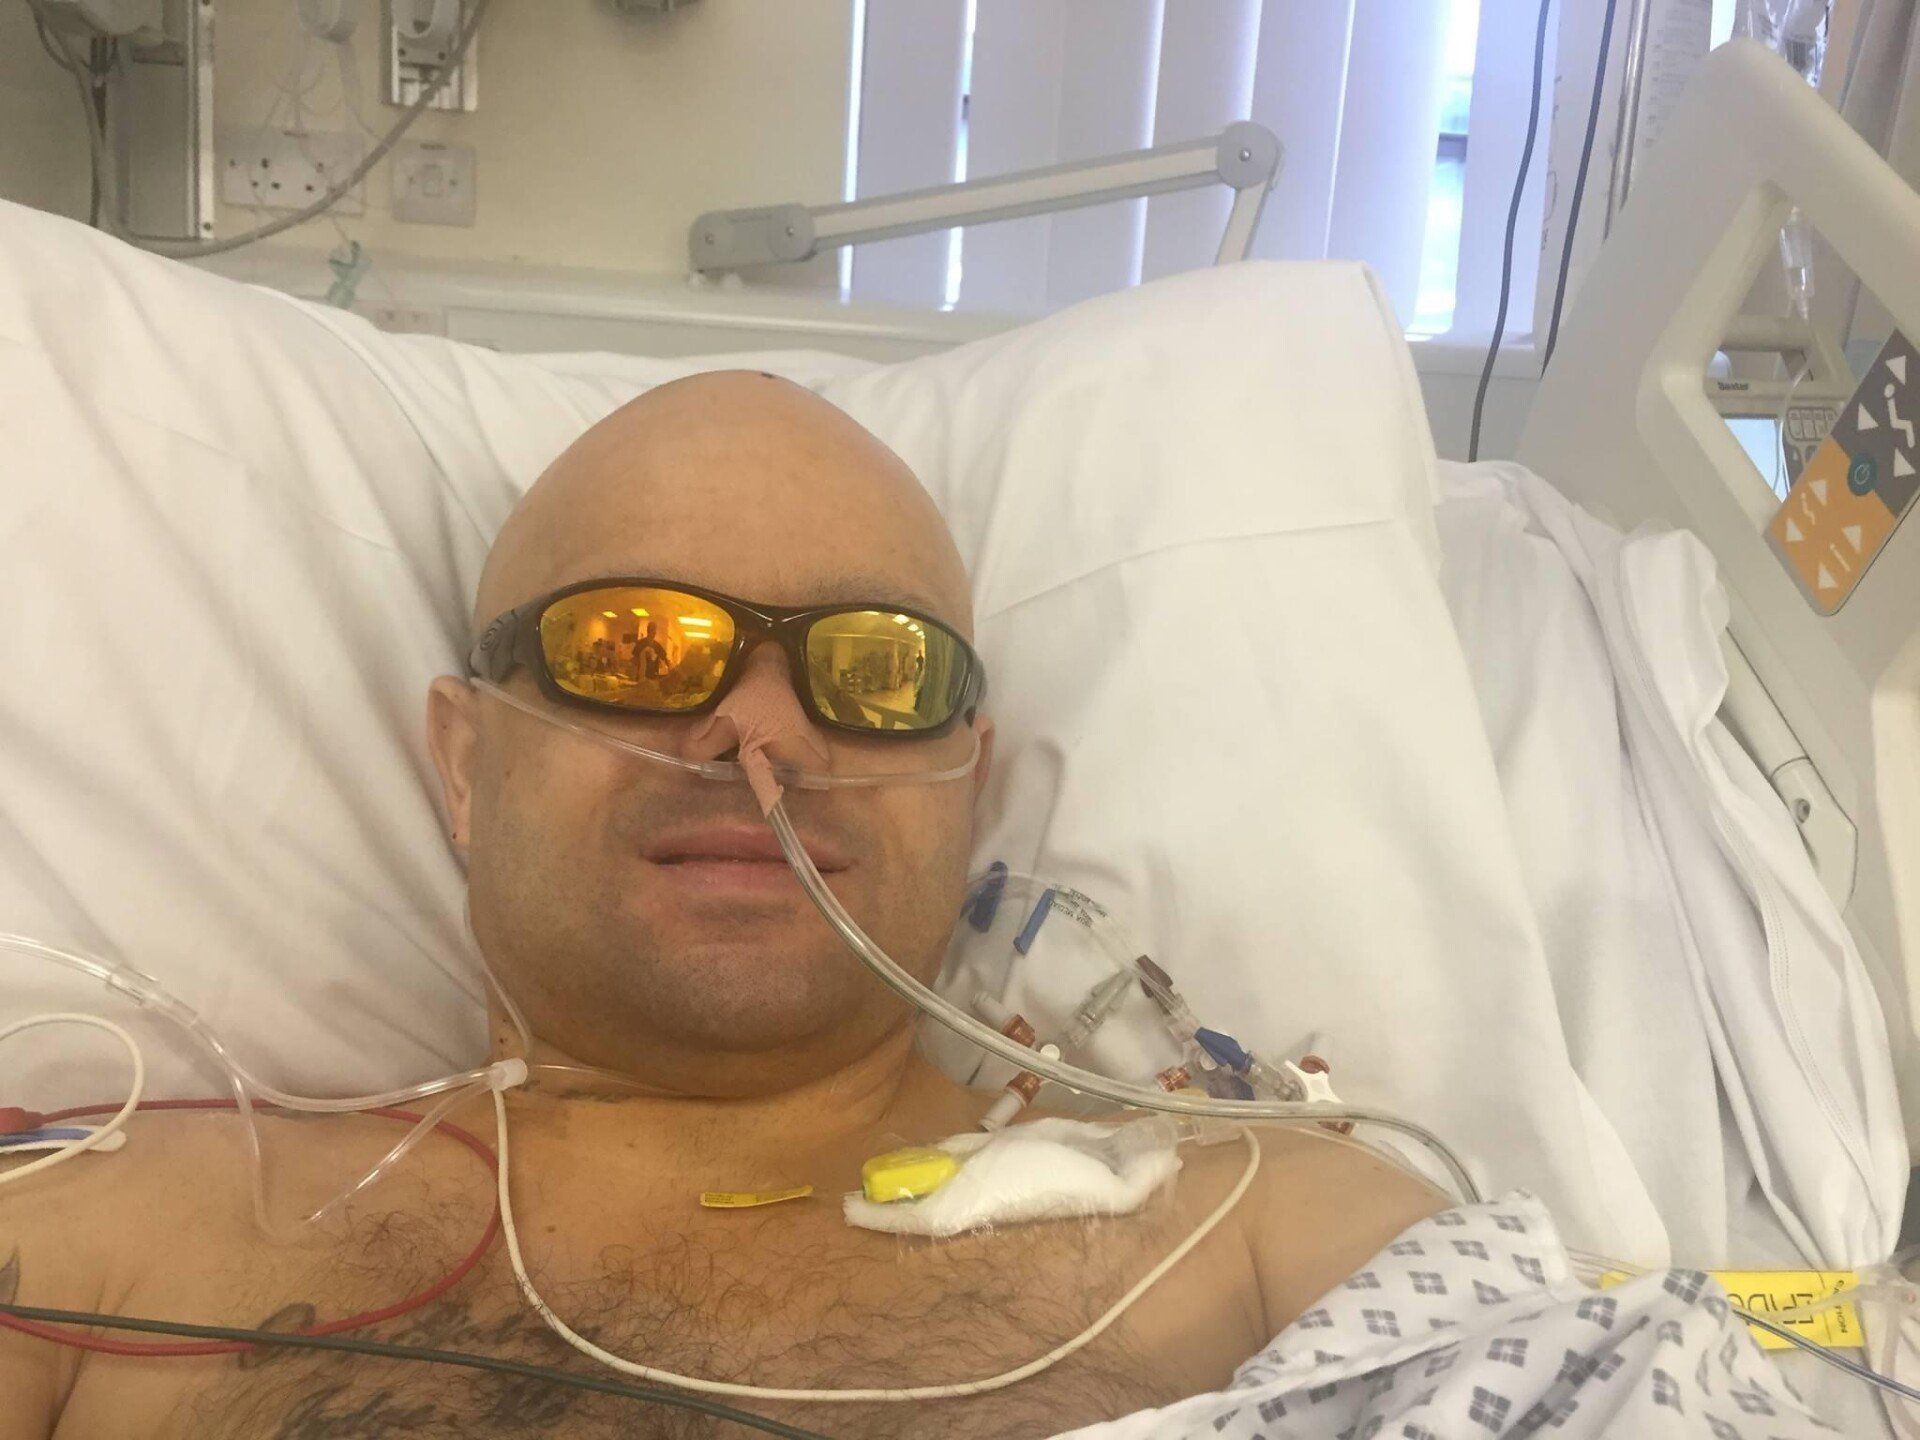 Wayne pugh in Manchester Royal infirmary just one day after major surgery with a transplant of a pancreas